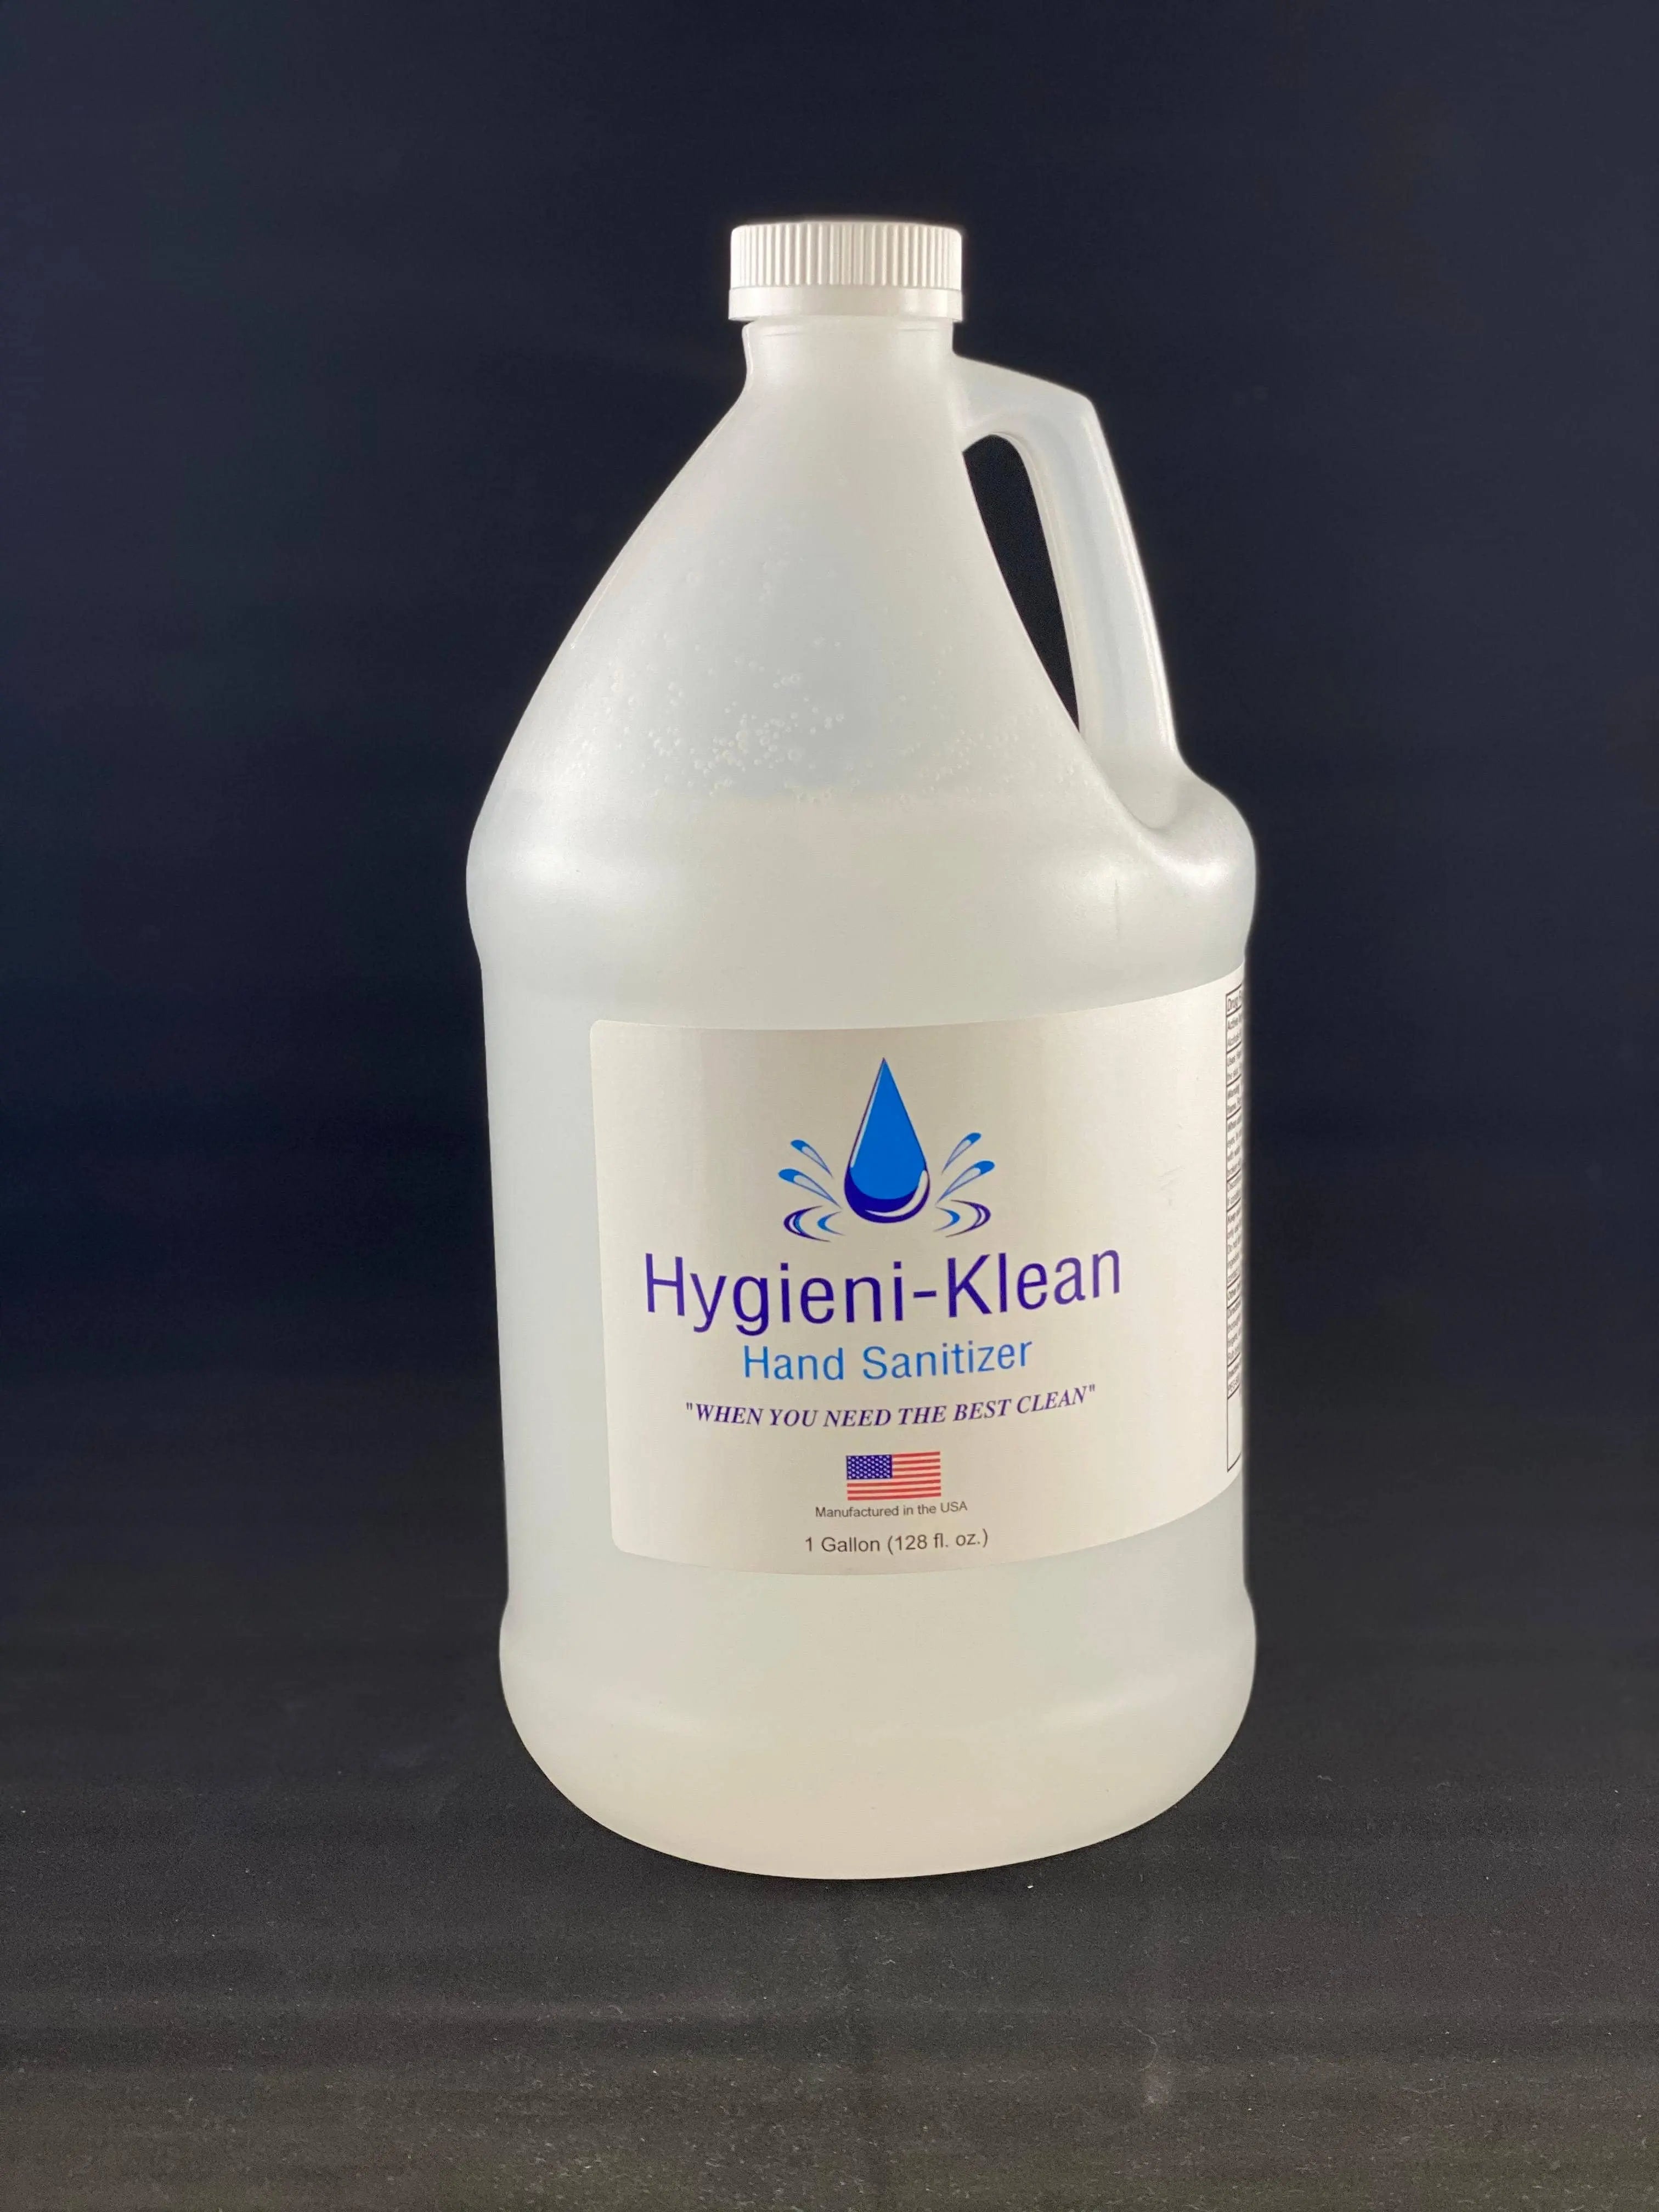 JANITORIAL - HYGIENKLEAN Alcohol Based Hand Sanitizer - 1 gallon jug - Becker Safety and Supply